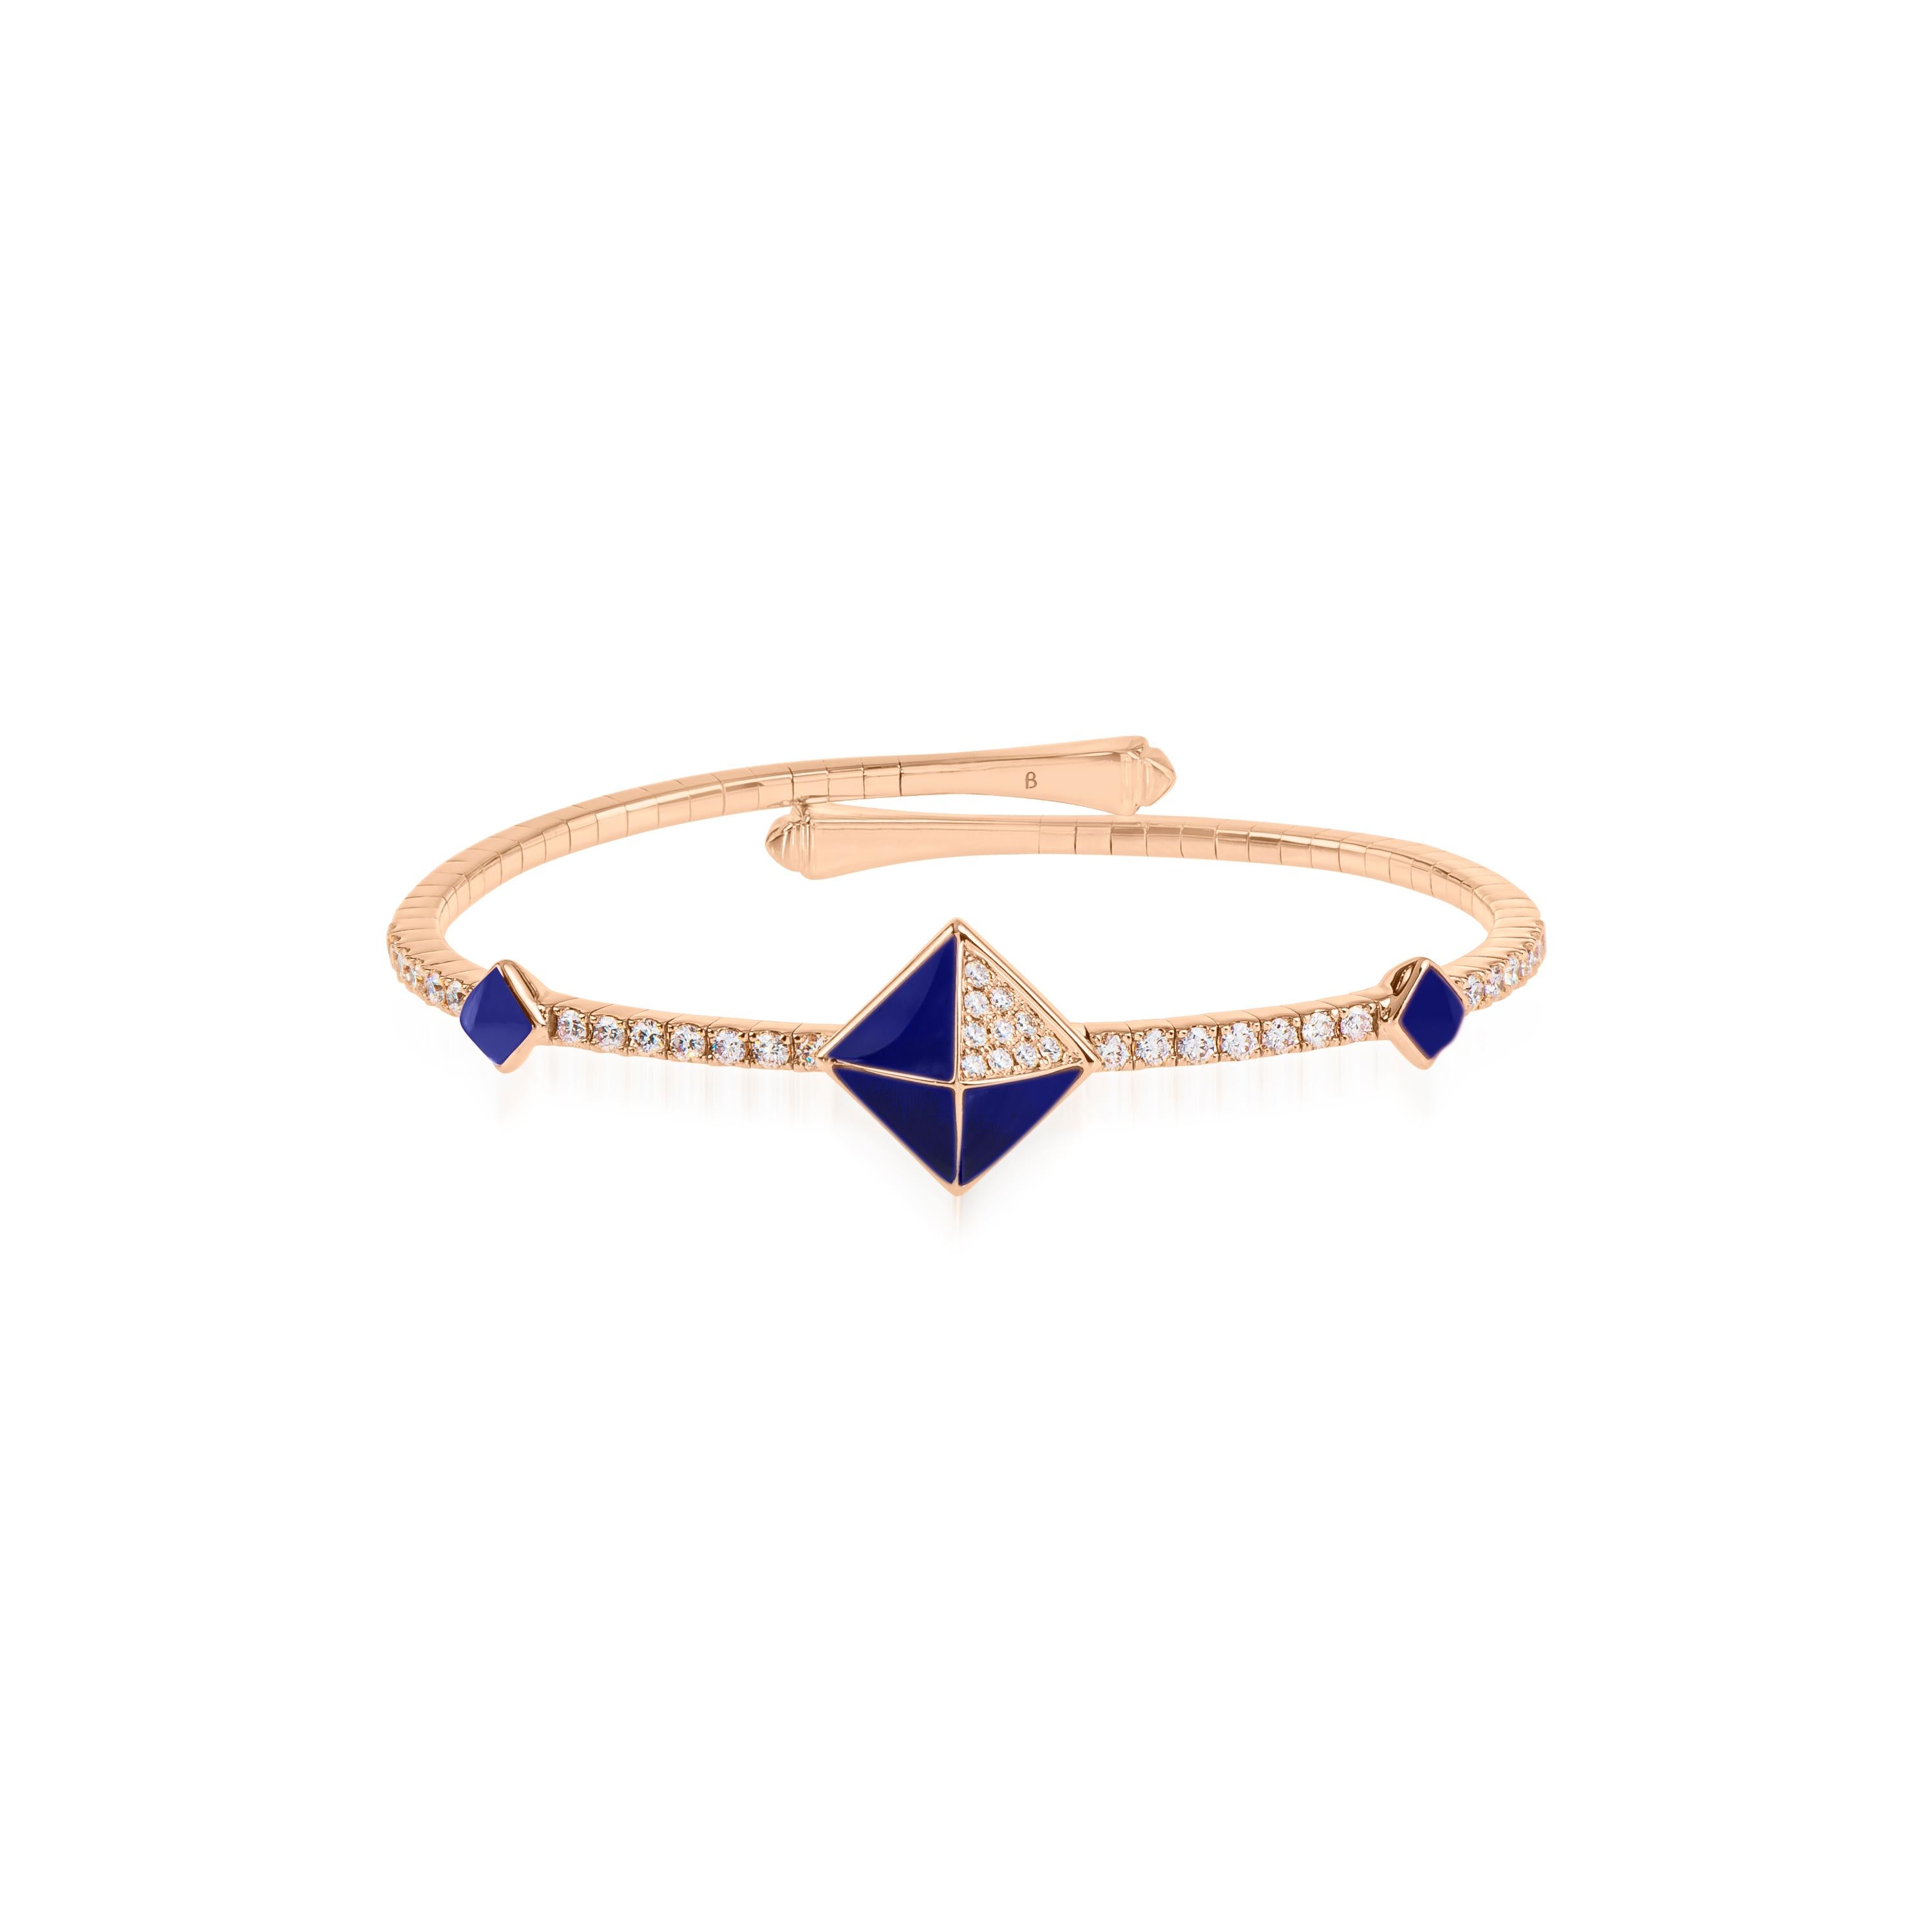 Through graphic, contemporary lines, Butani’s Tetra collection celebrates the beauty of symmetry while reimagining classic motifs of the past. 

Offering a simple elegance, the Tetra Apex Bangle features a distinctive pyramid motif that gleams with